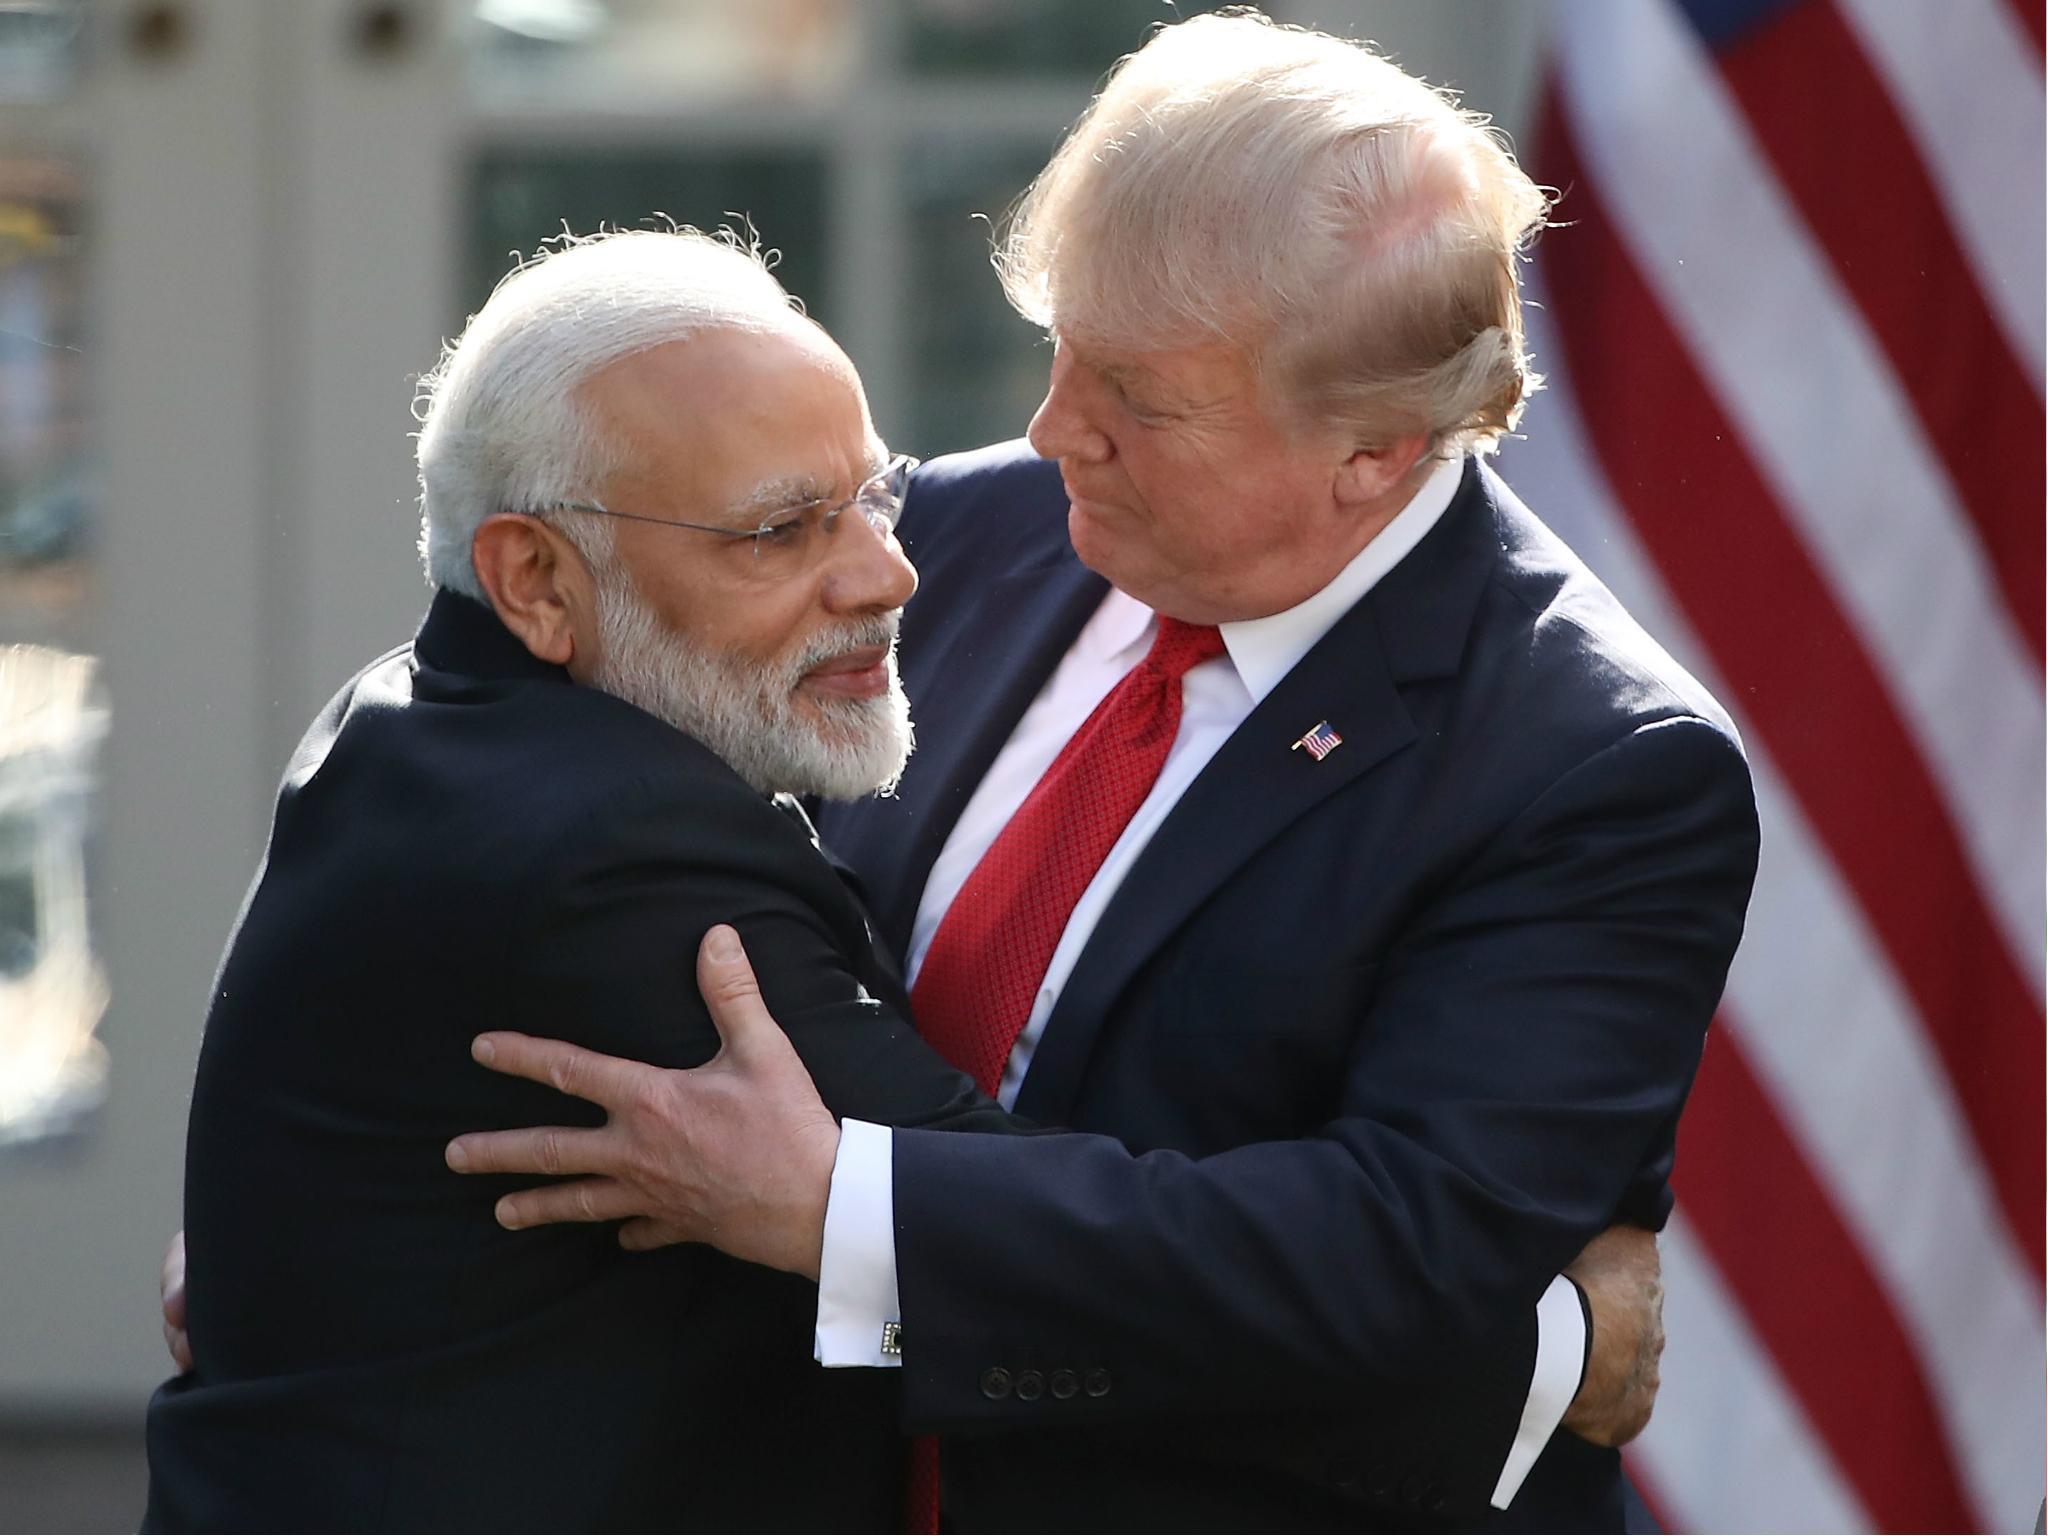 India set to dazzle Trump with pomp and circumstance as trade rows fester